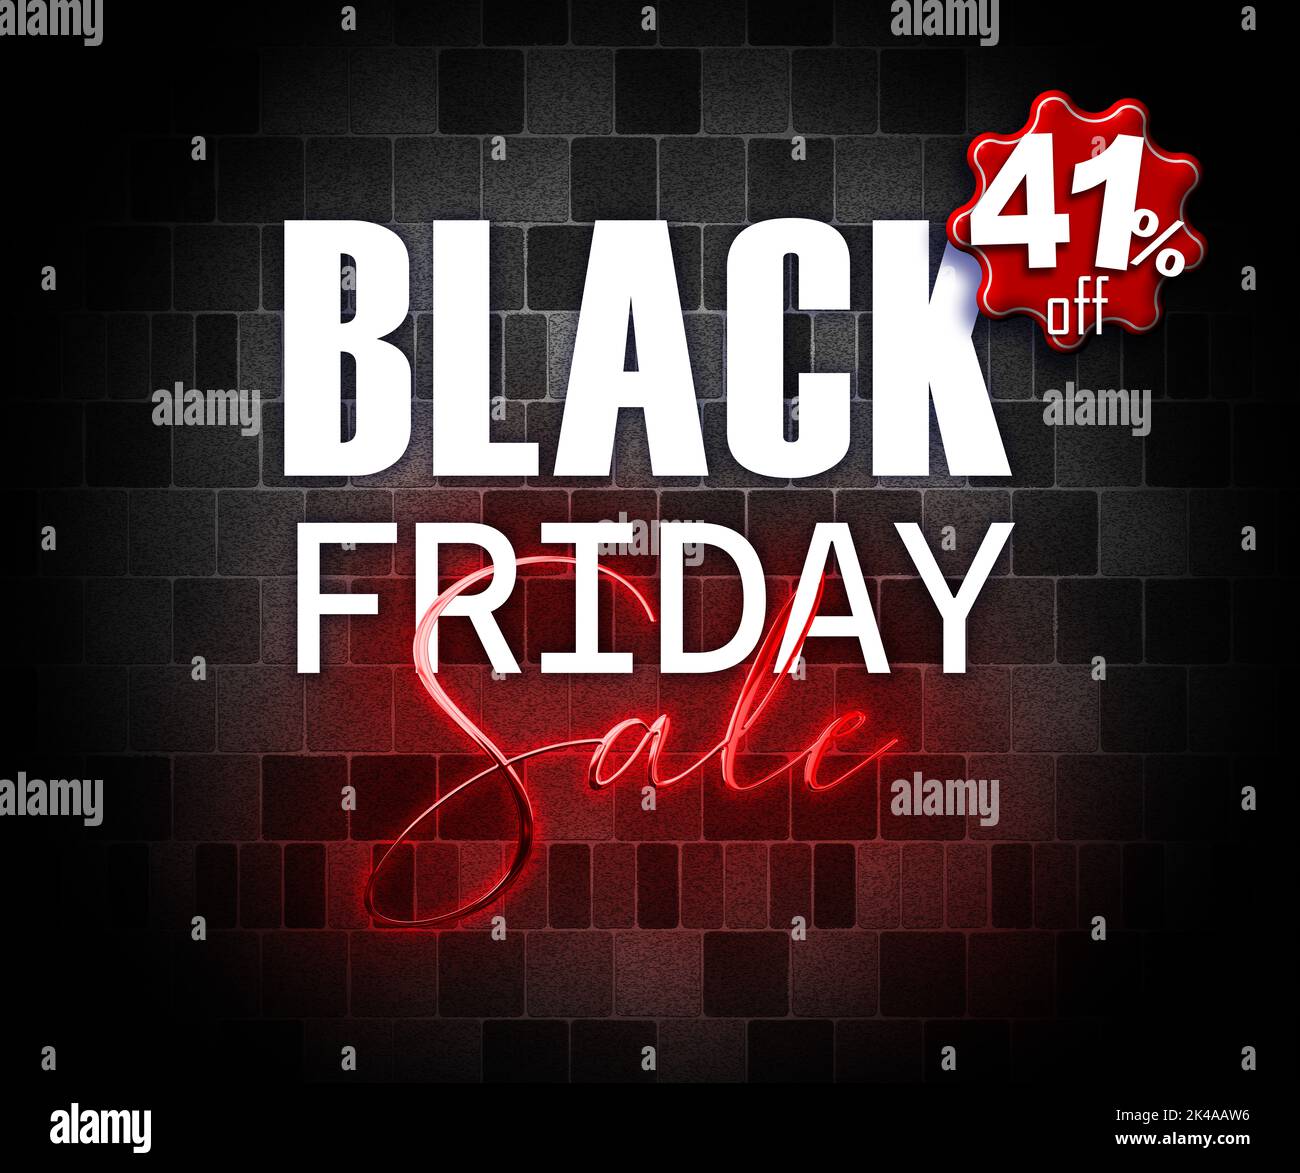 illustration with 3d elements black friday promotion banner 41 percent off sales increase Stock Photo